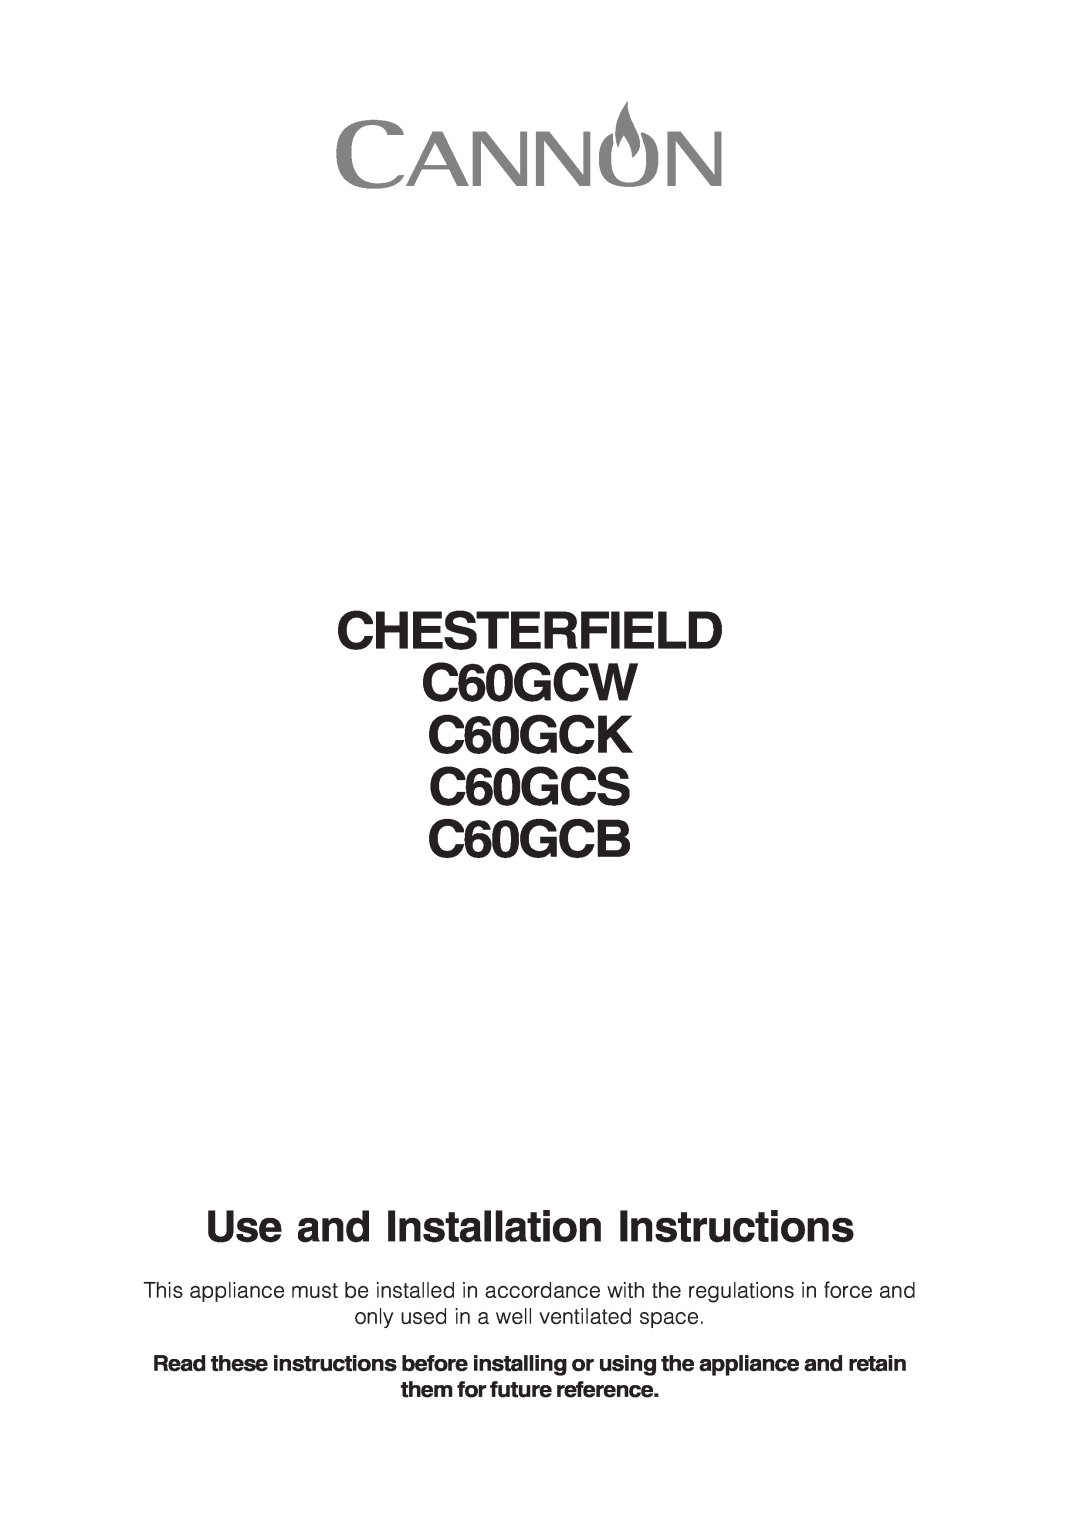 Cannon installation instructions CHESTERFIELD C60GCW C60GCK C60GCS C60GCB, Use and Installation Instructions 